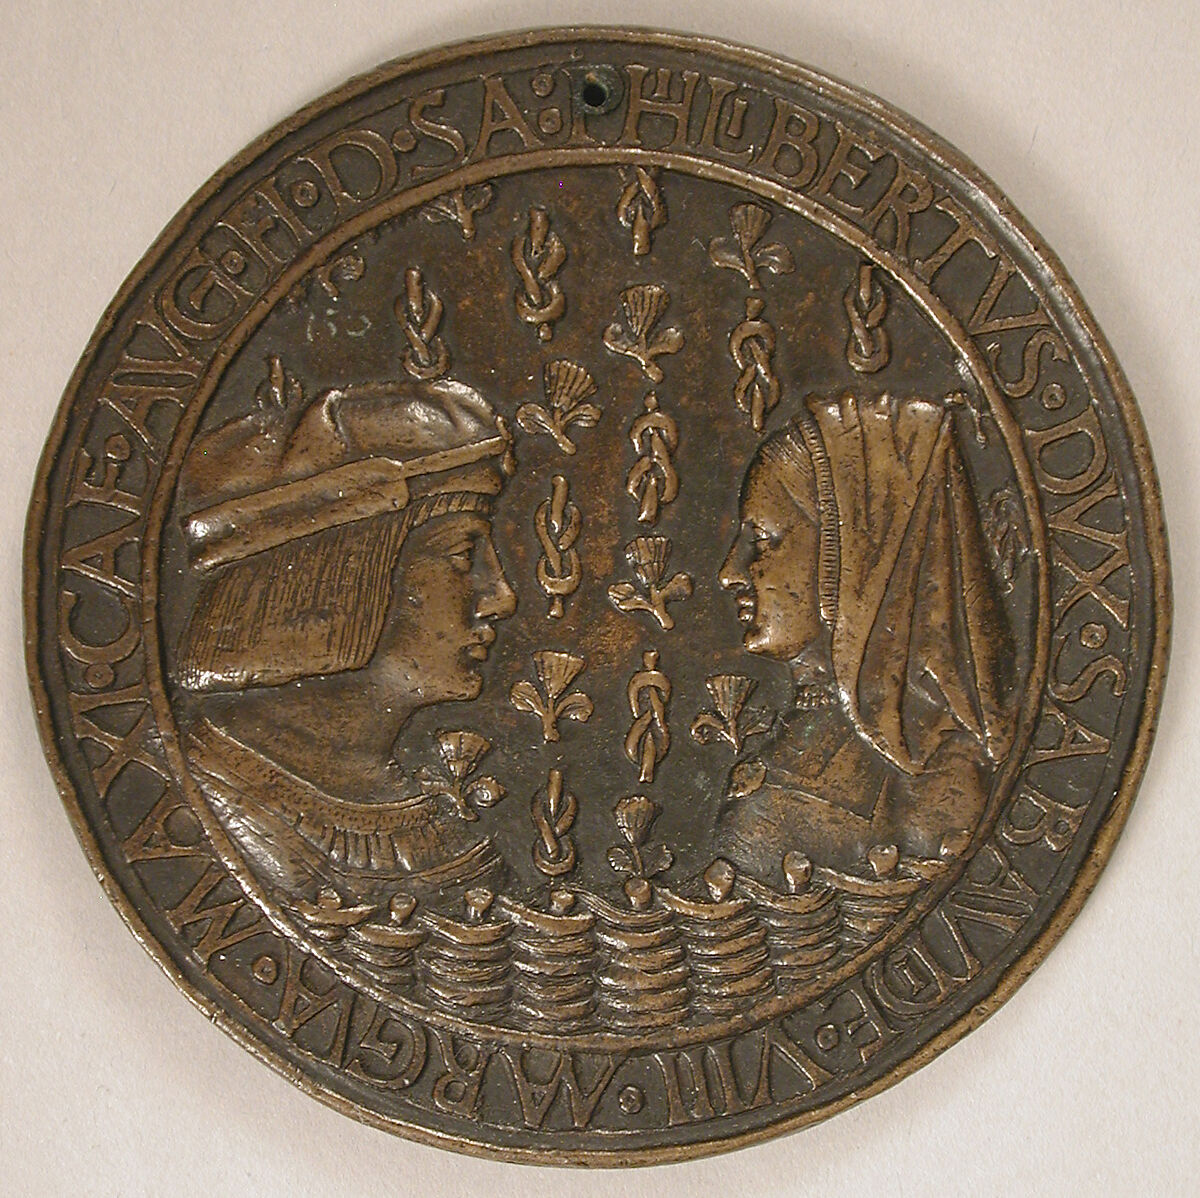 Medal of Duke Philibert II of Savoy (1480–1504) and Margaret of Austria (1480–1530), Copper alloy, French 